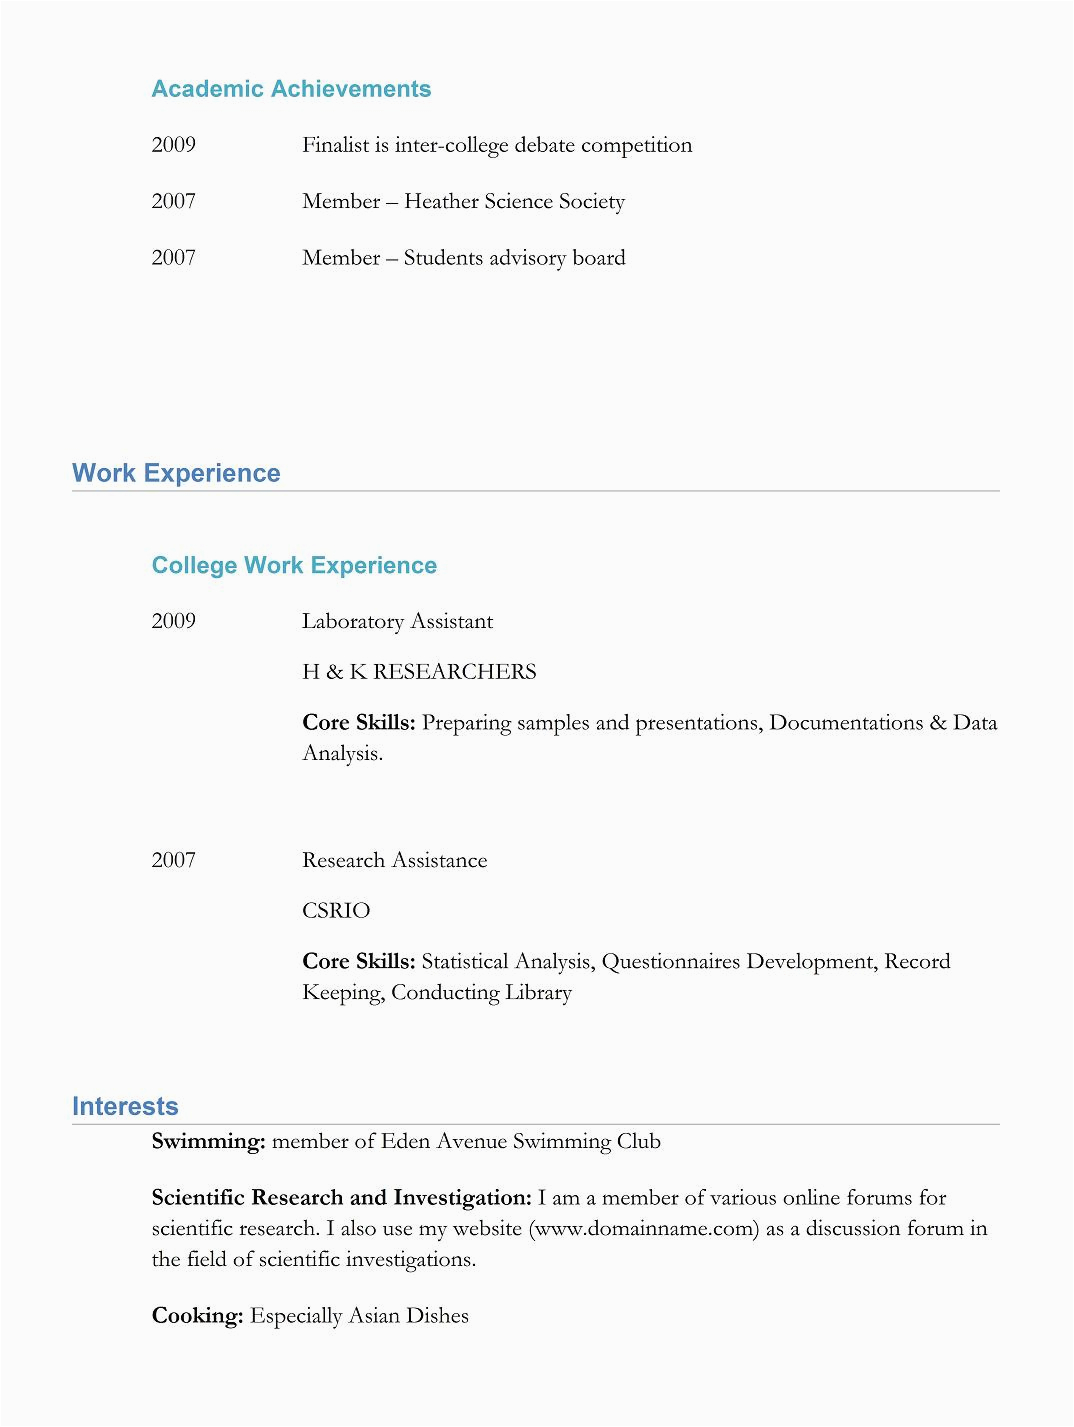 Samples Of Different Styles Of Resumes 9 Best Different Types Of Resumes formats Sample